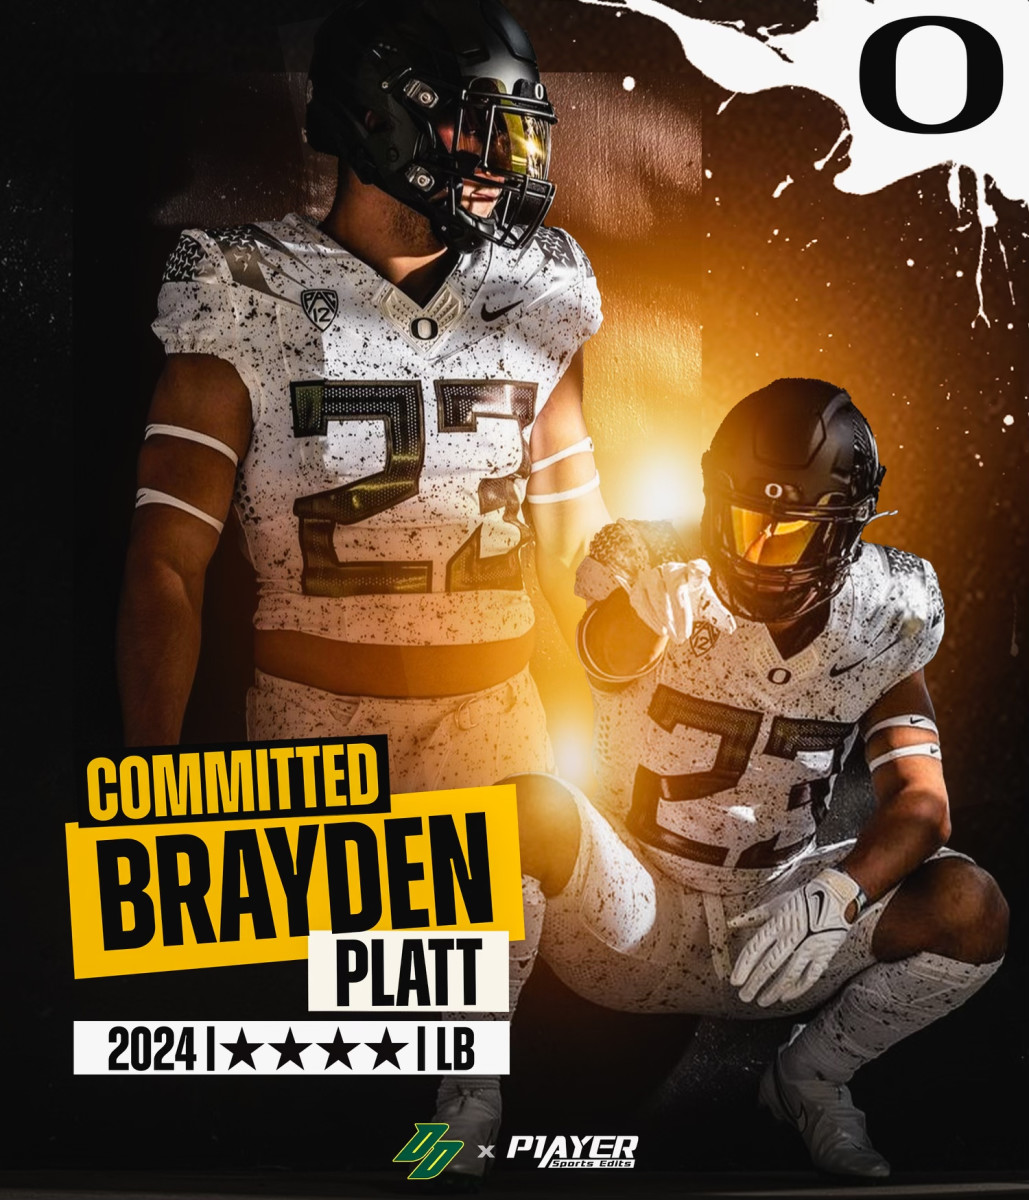 Brayden Platt marks the second time in three cycles Oregon has signed the top recruit out of the state of Washington.